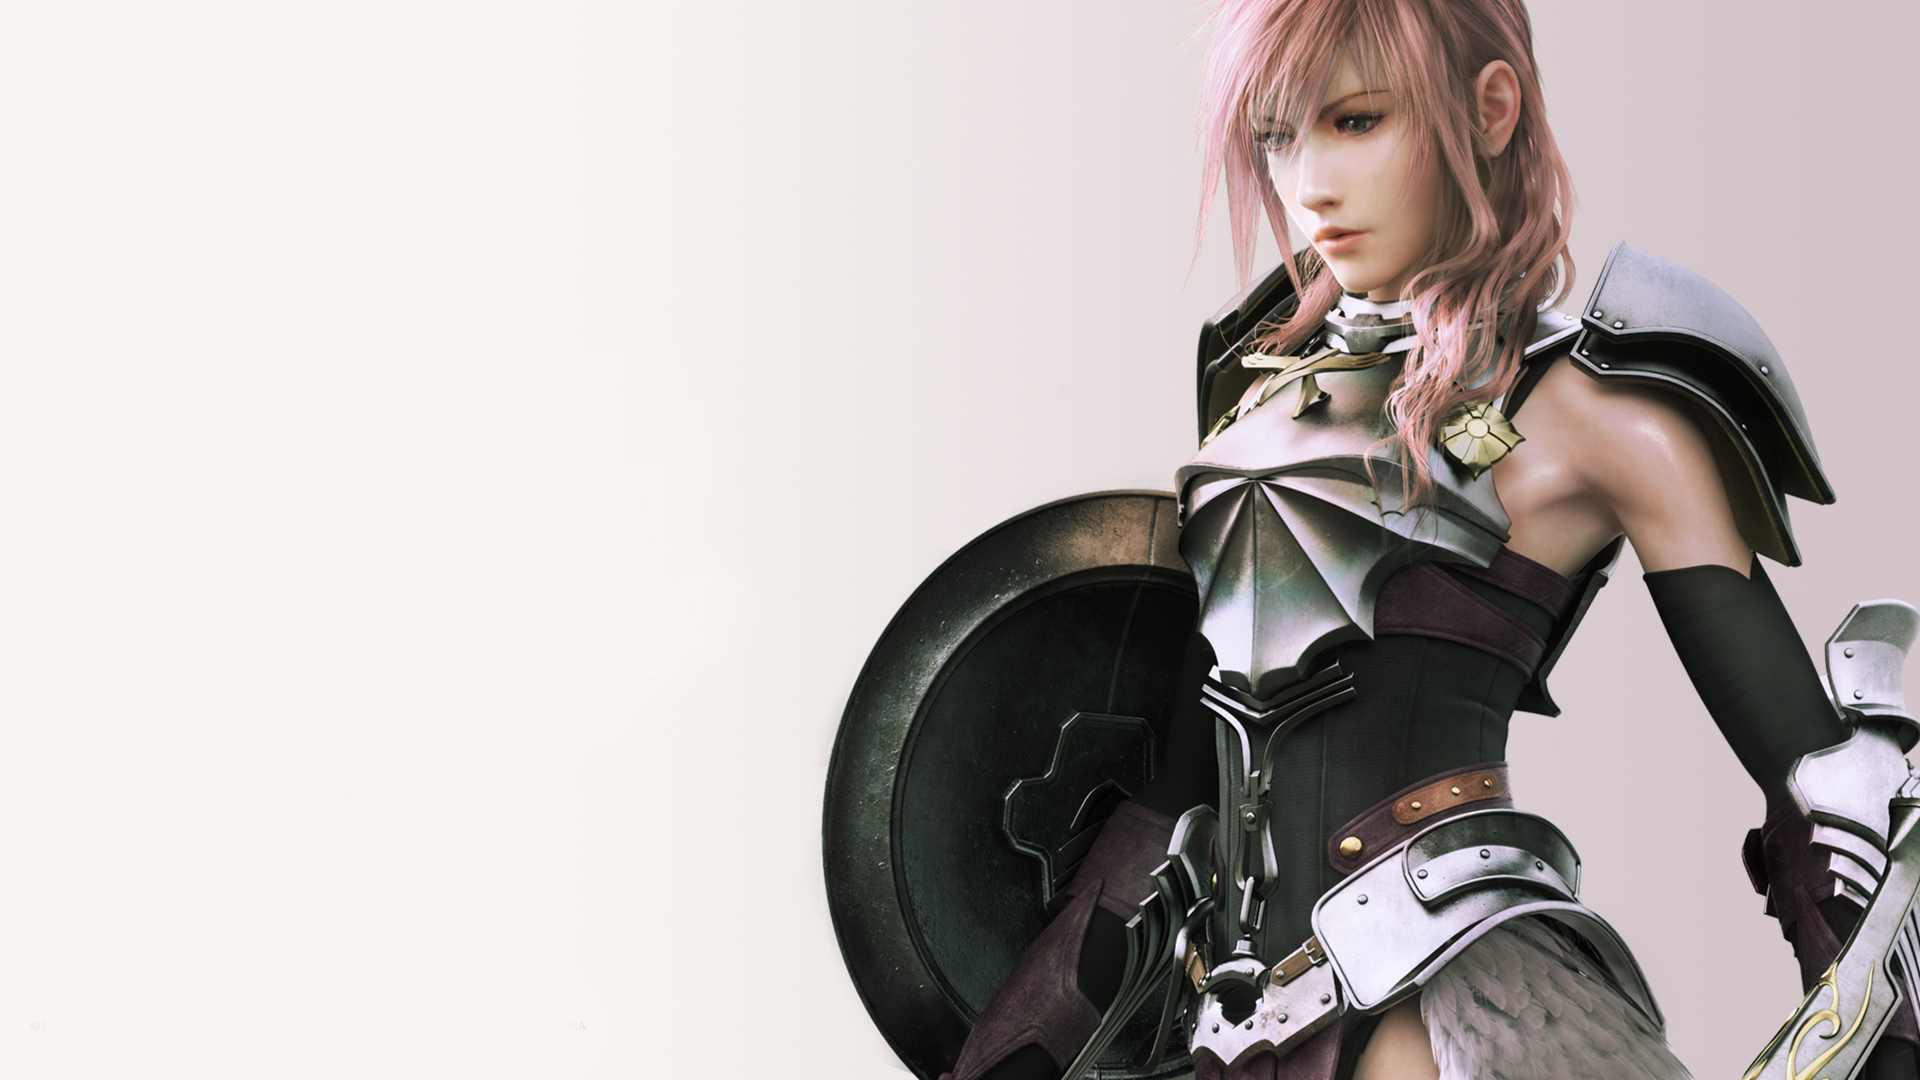 General 1920x1080 Final Fantasy XIII Claire Farron video games video game art